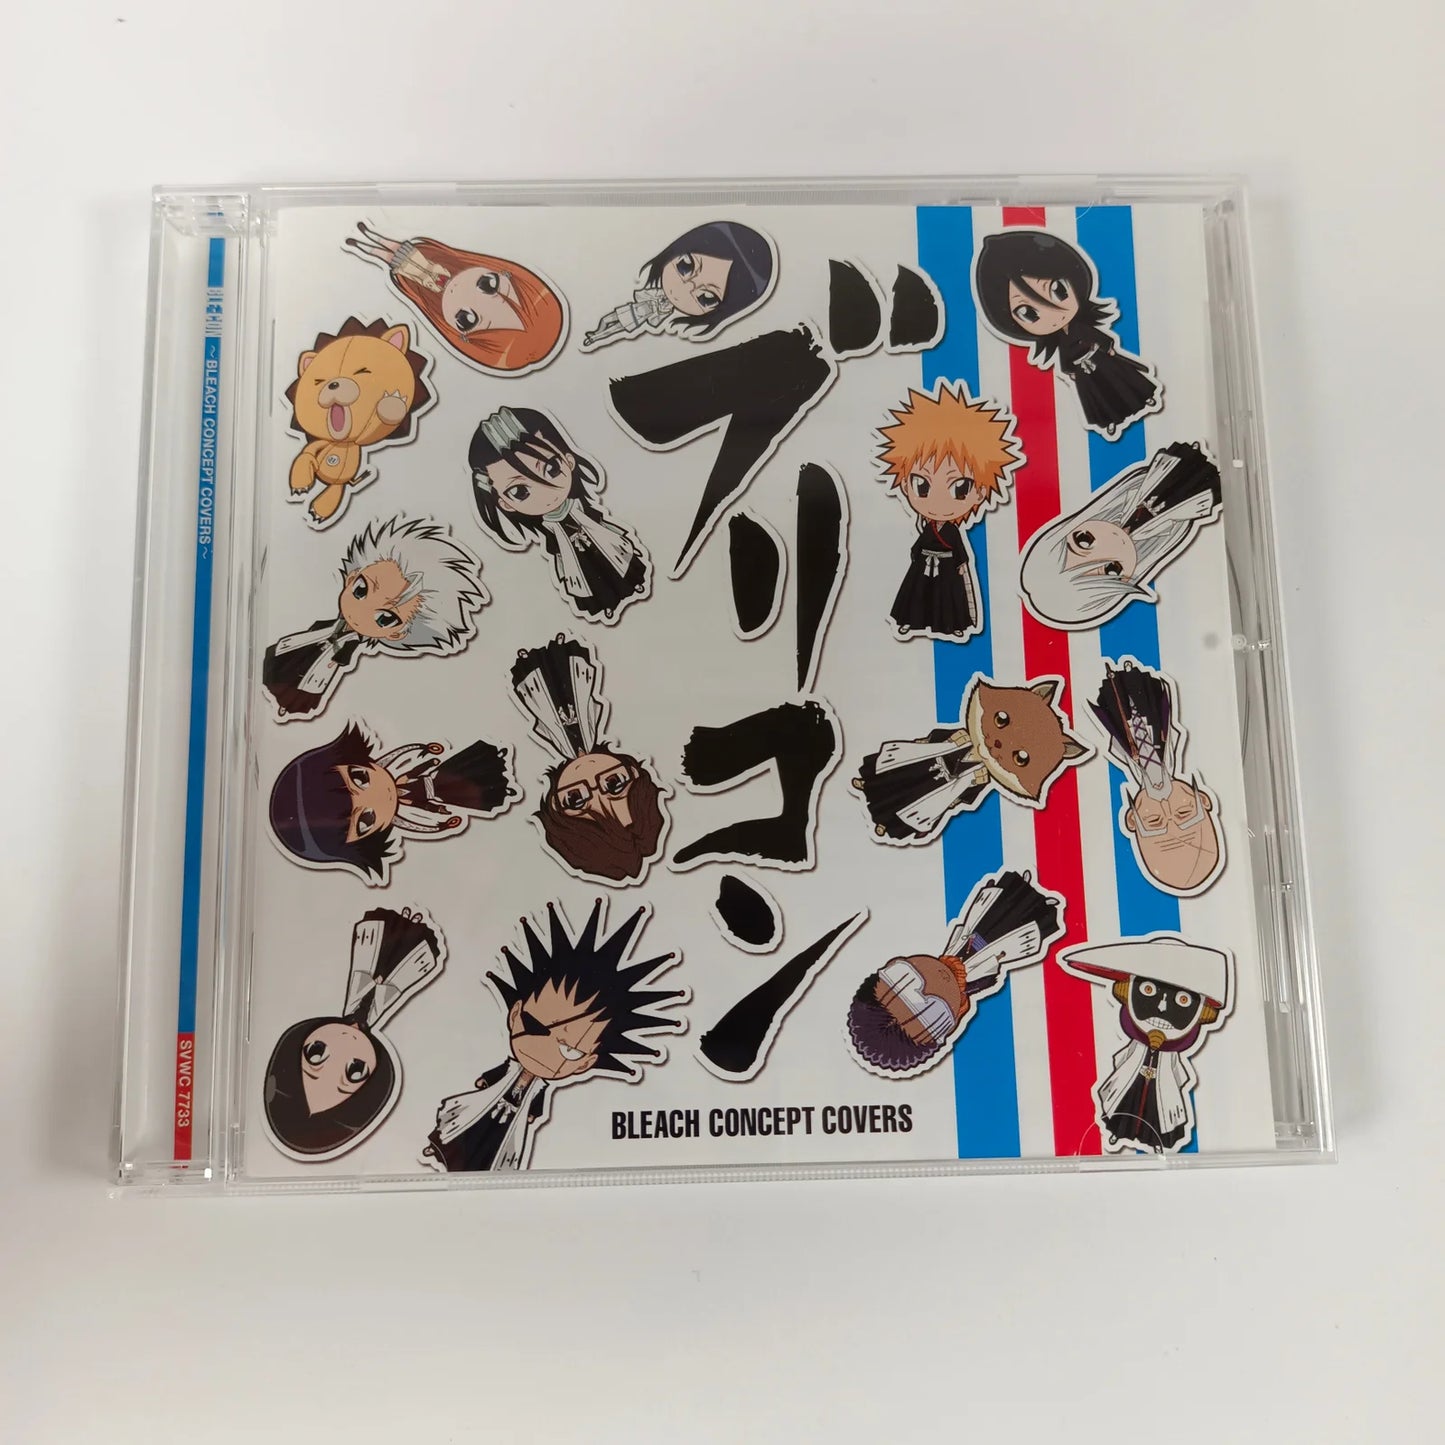 Bleach Concept Covers